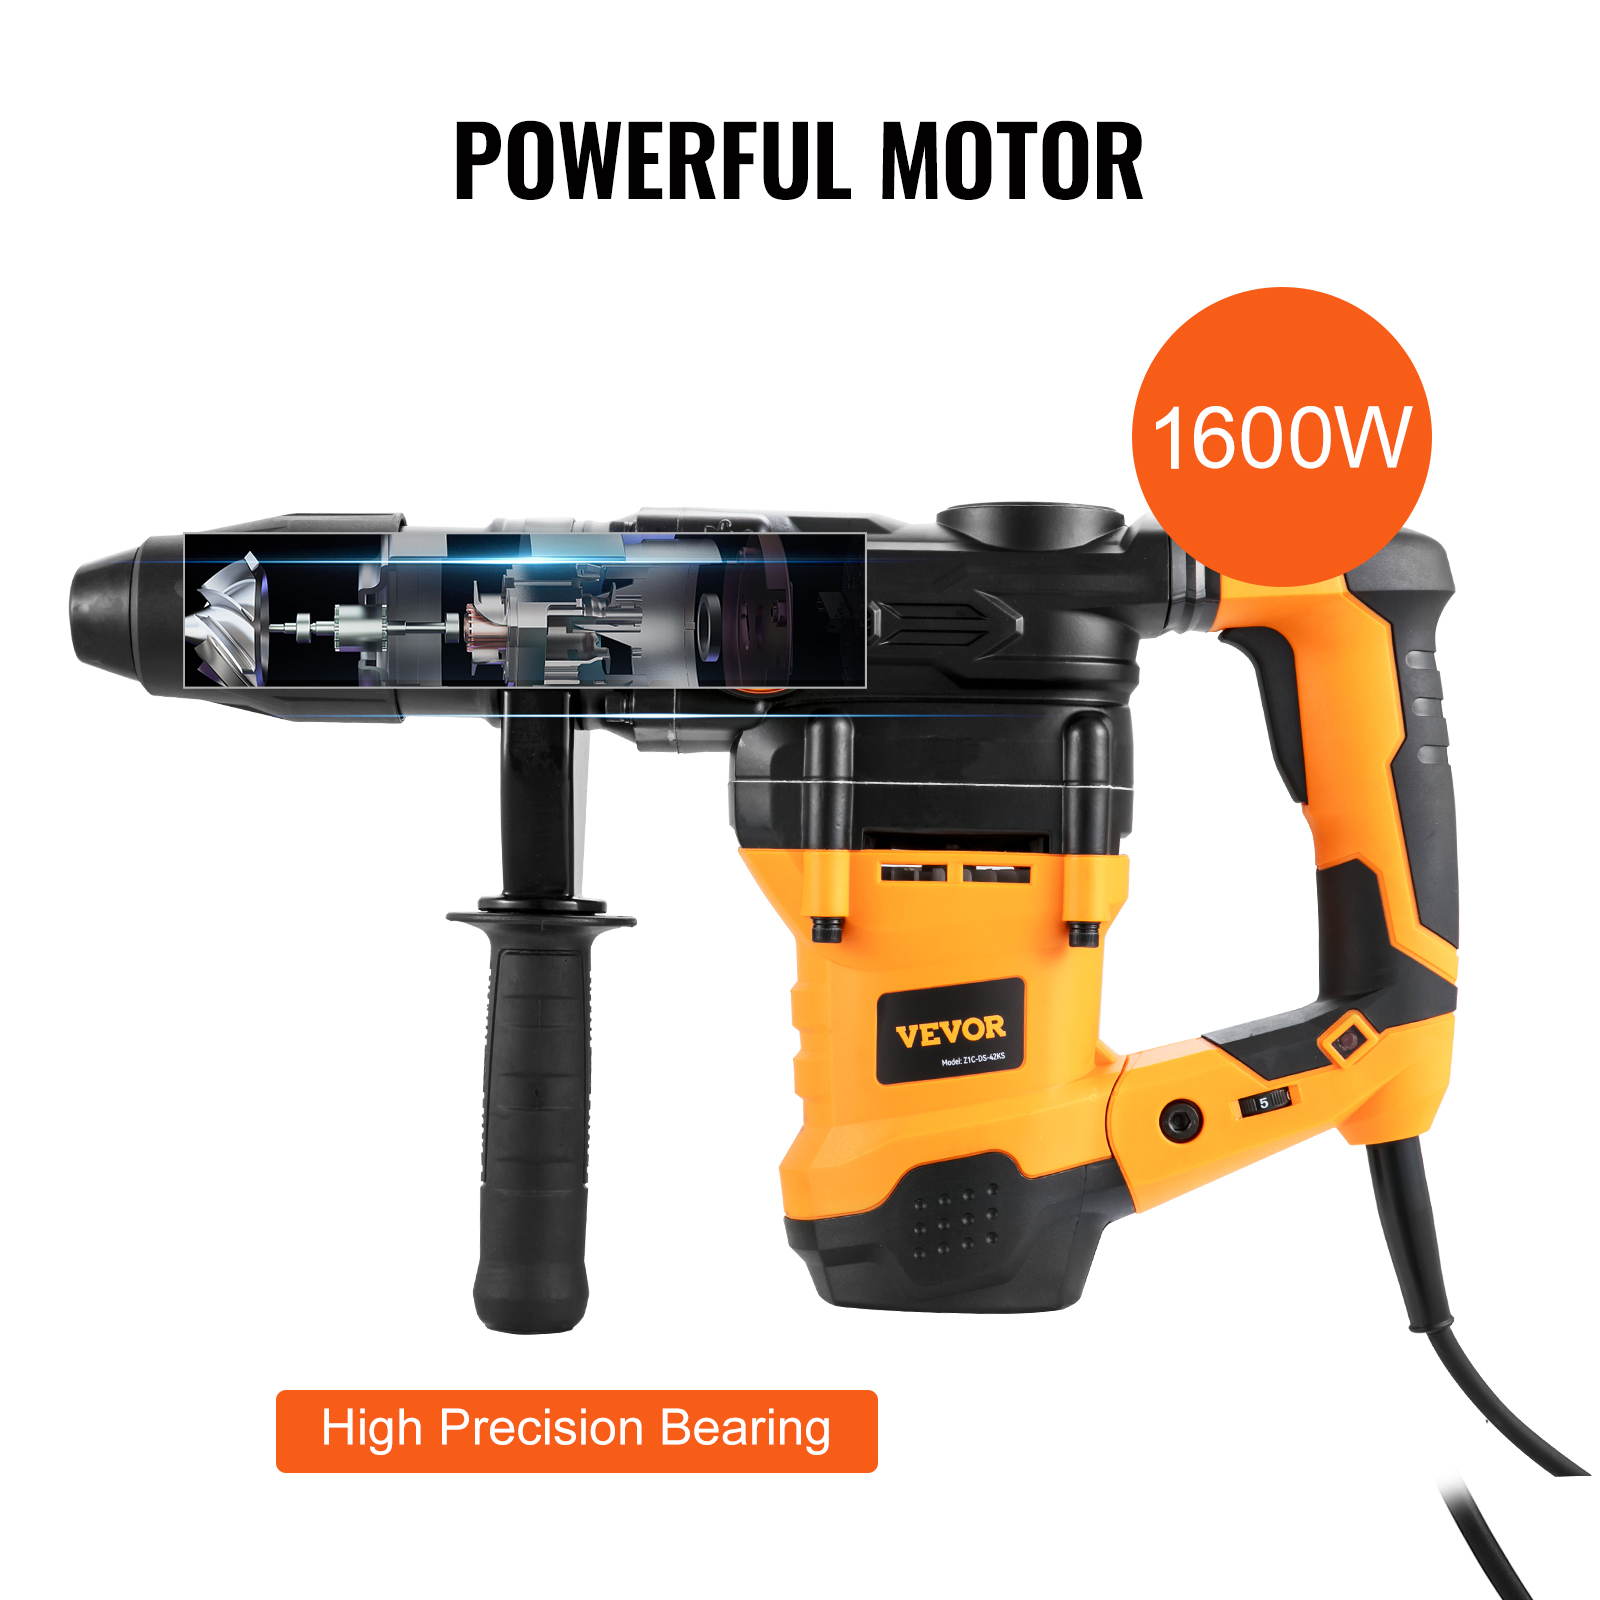 Vevor 1600W 42mm Rotary Corded Hammer Drill | Power Tool